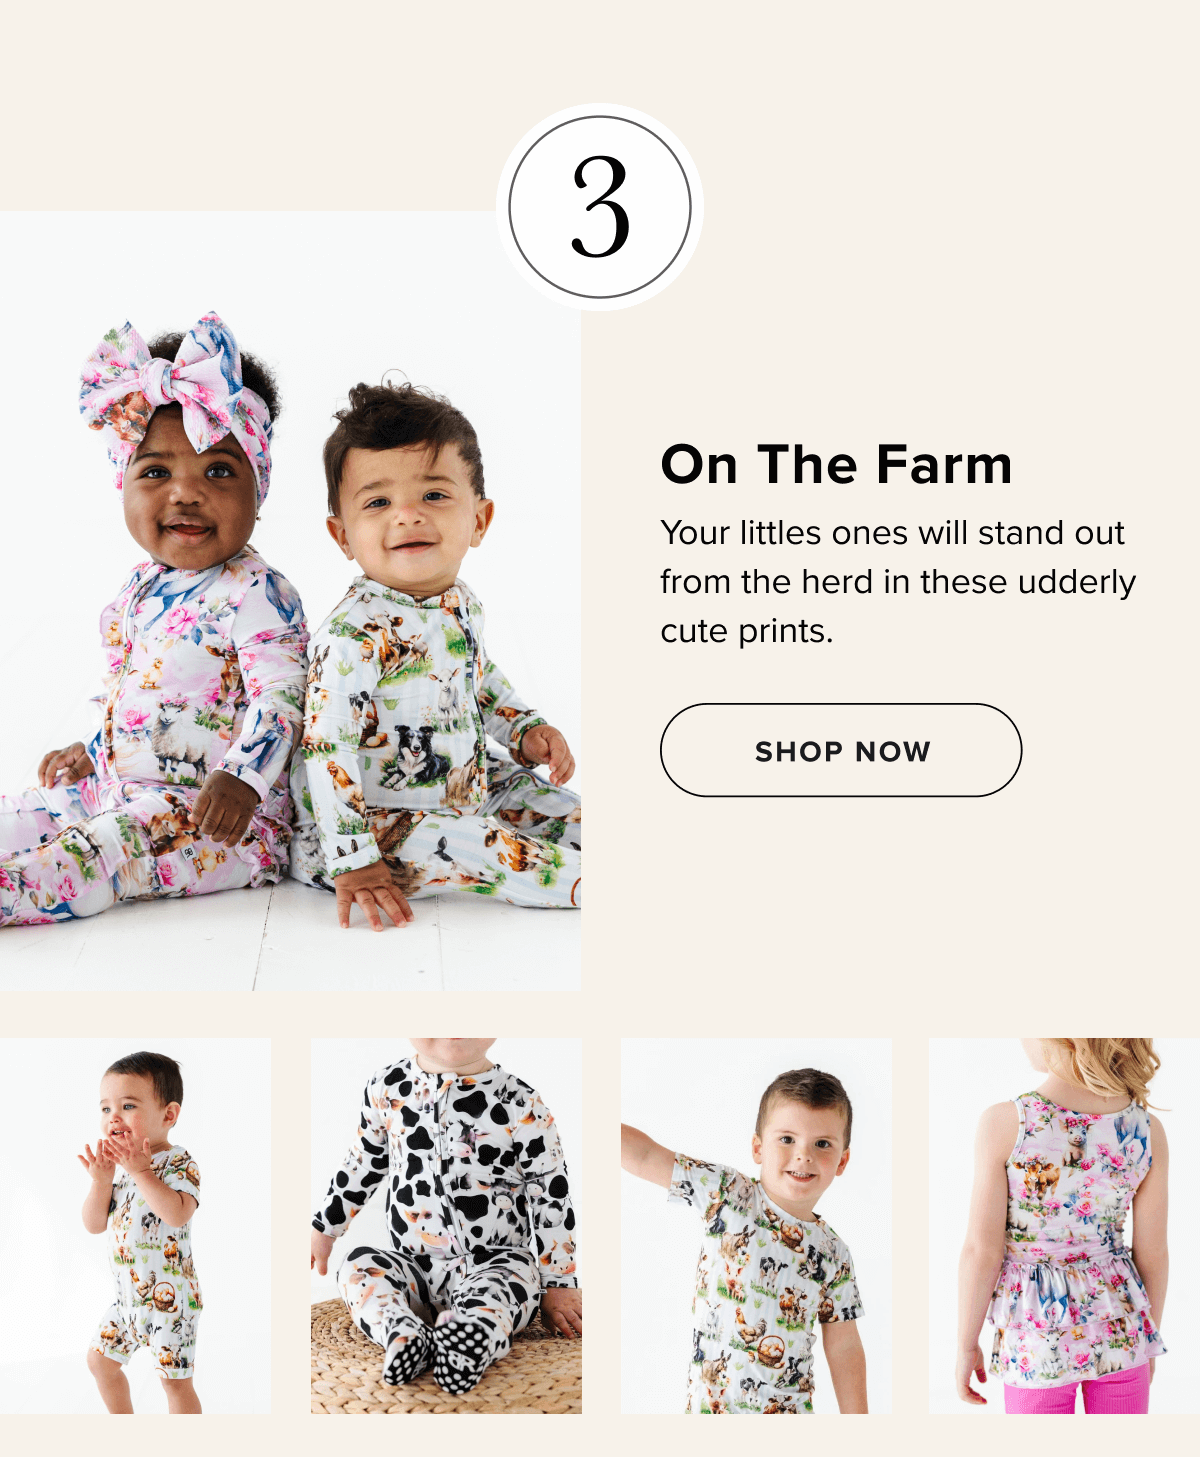 On The Farm Your littles ones will stand out from the herd in these udderly cute prints.